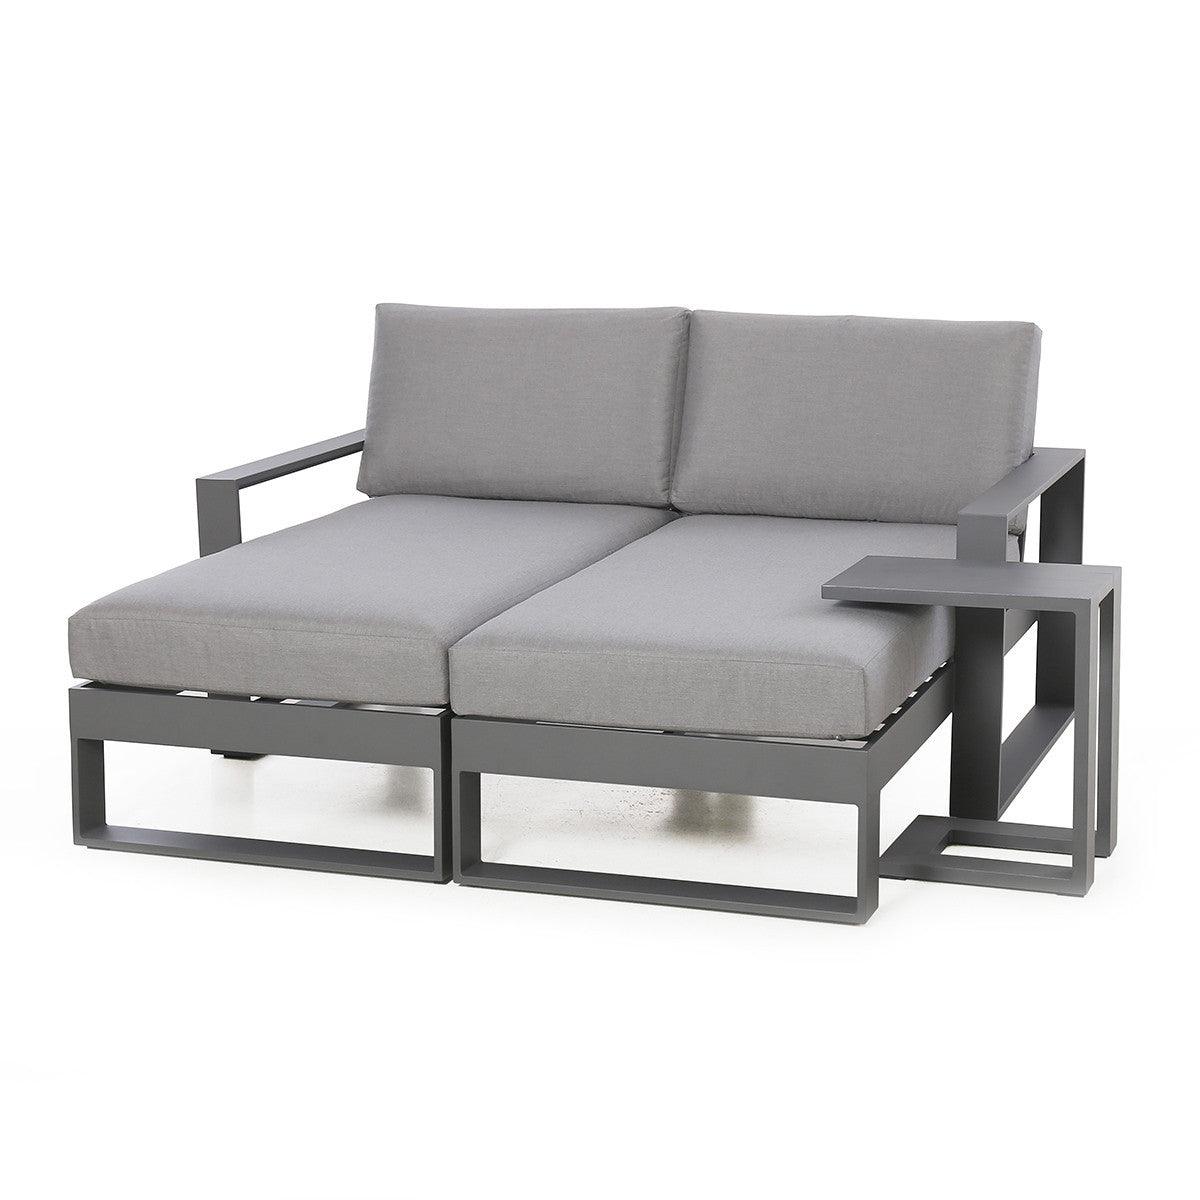 Amalfi Double Sunlounger with Side Table - Vookoo Lifestyle